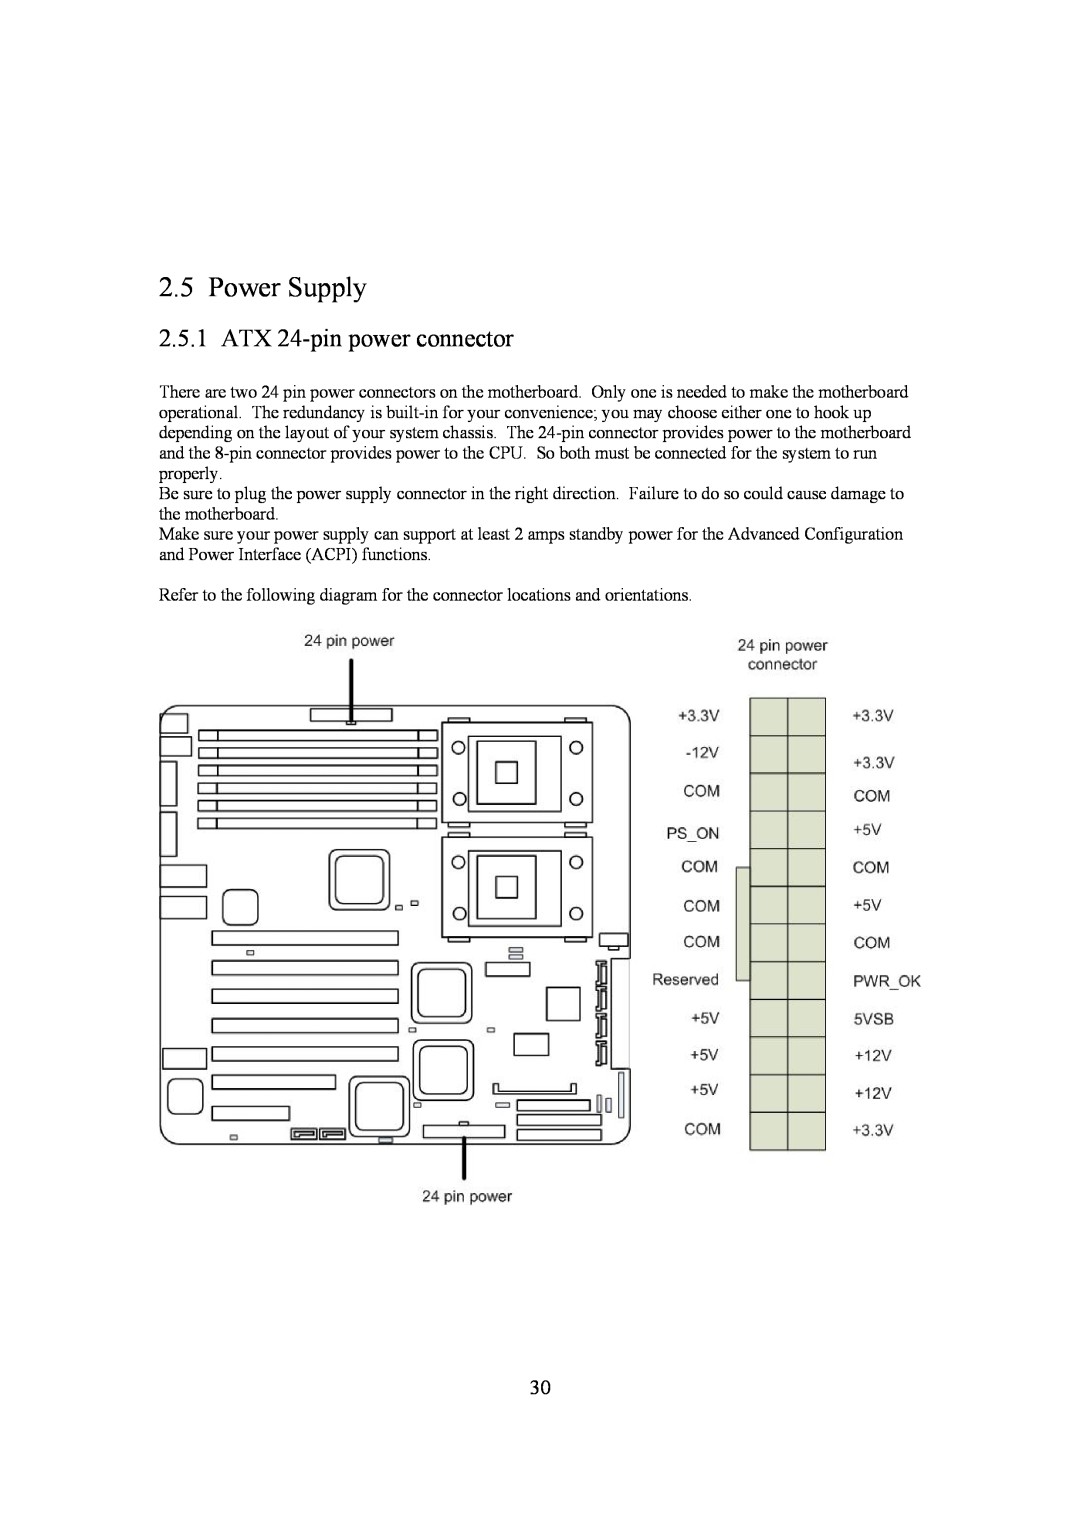 Intel LH500 user manual Power Supply, ATX 24-pinpower connector 